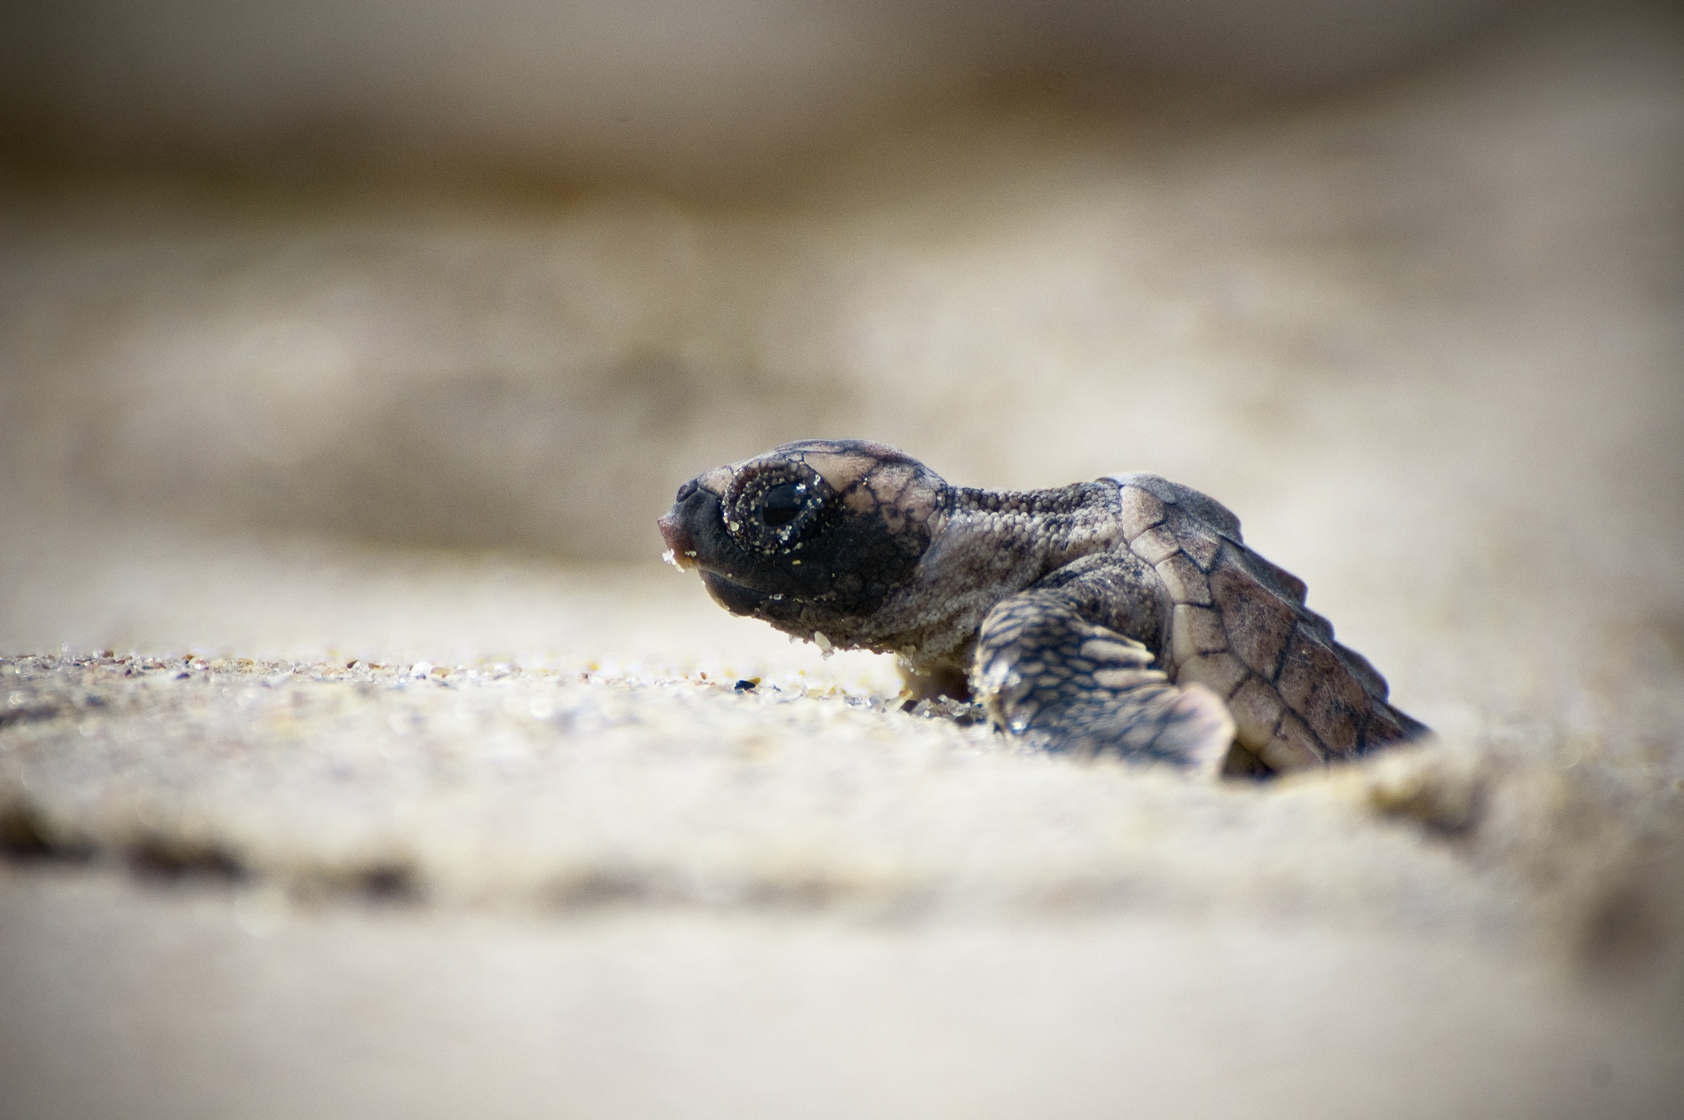 Hatched baby turtle on the beach of Costa Rica